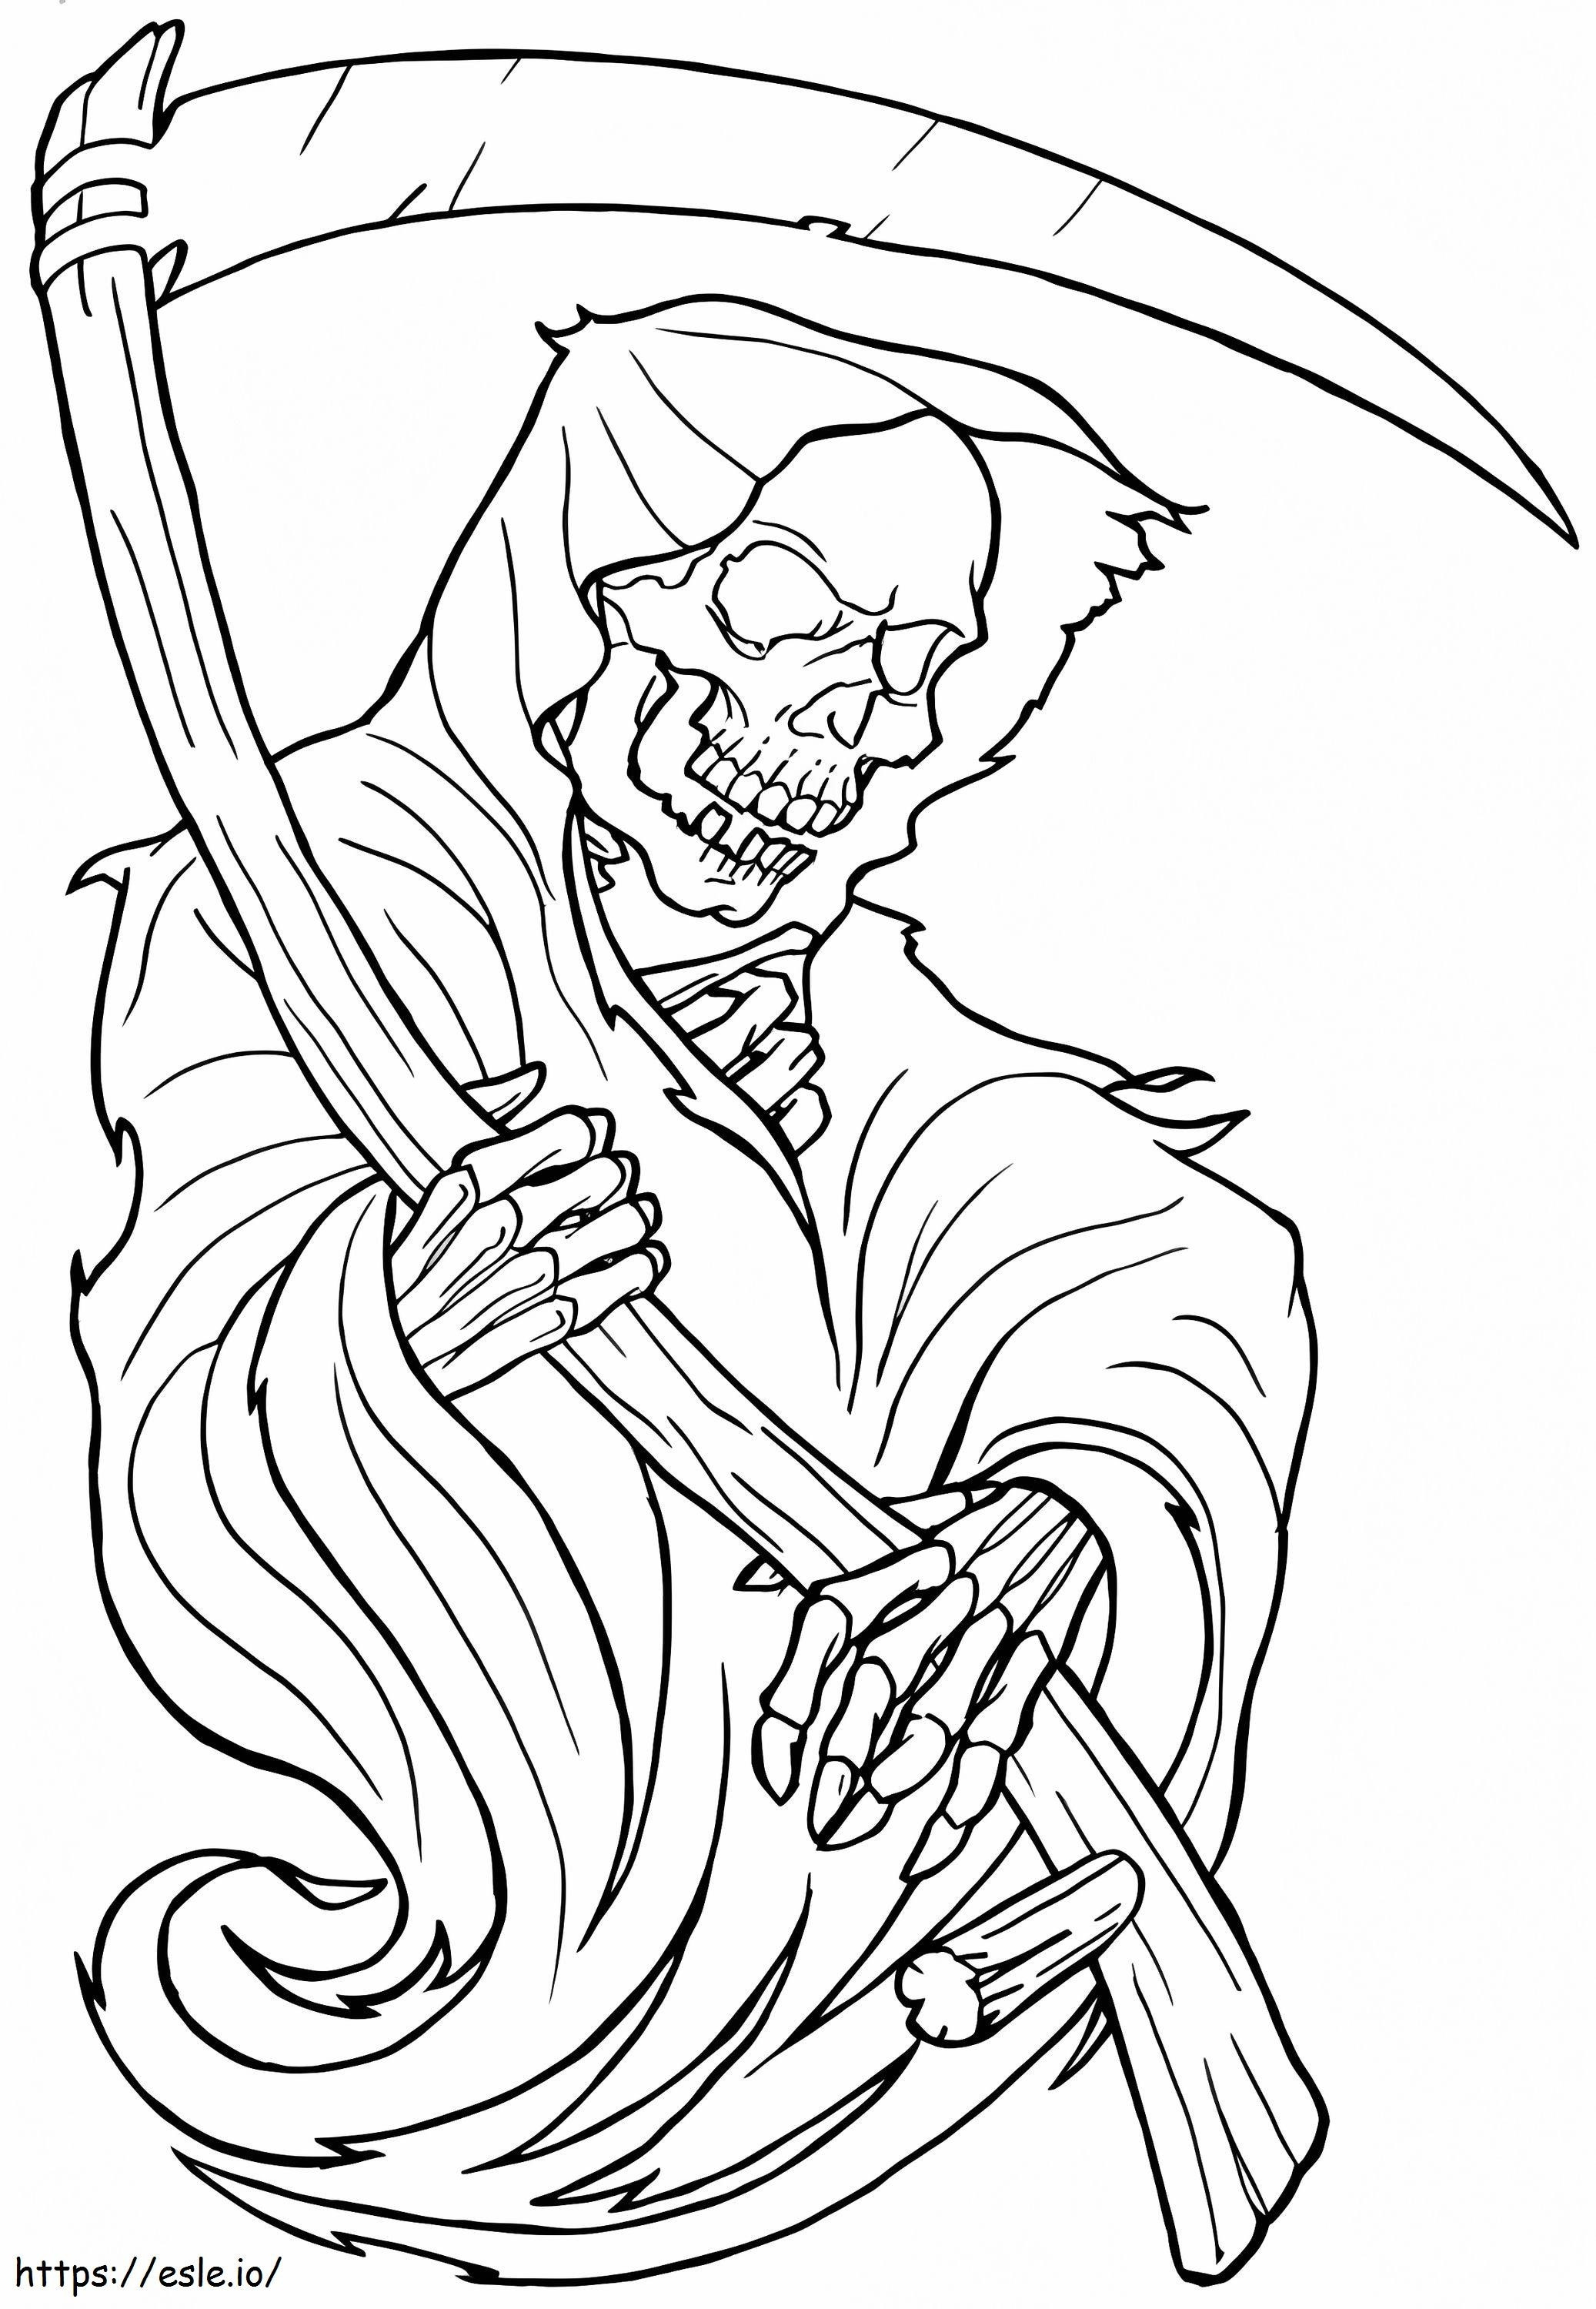 Terror As It Were coloring page